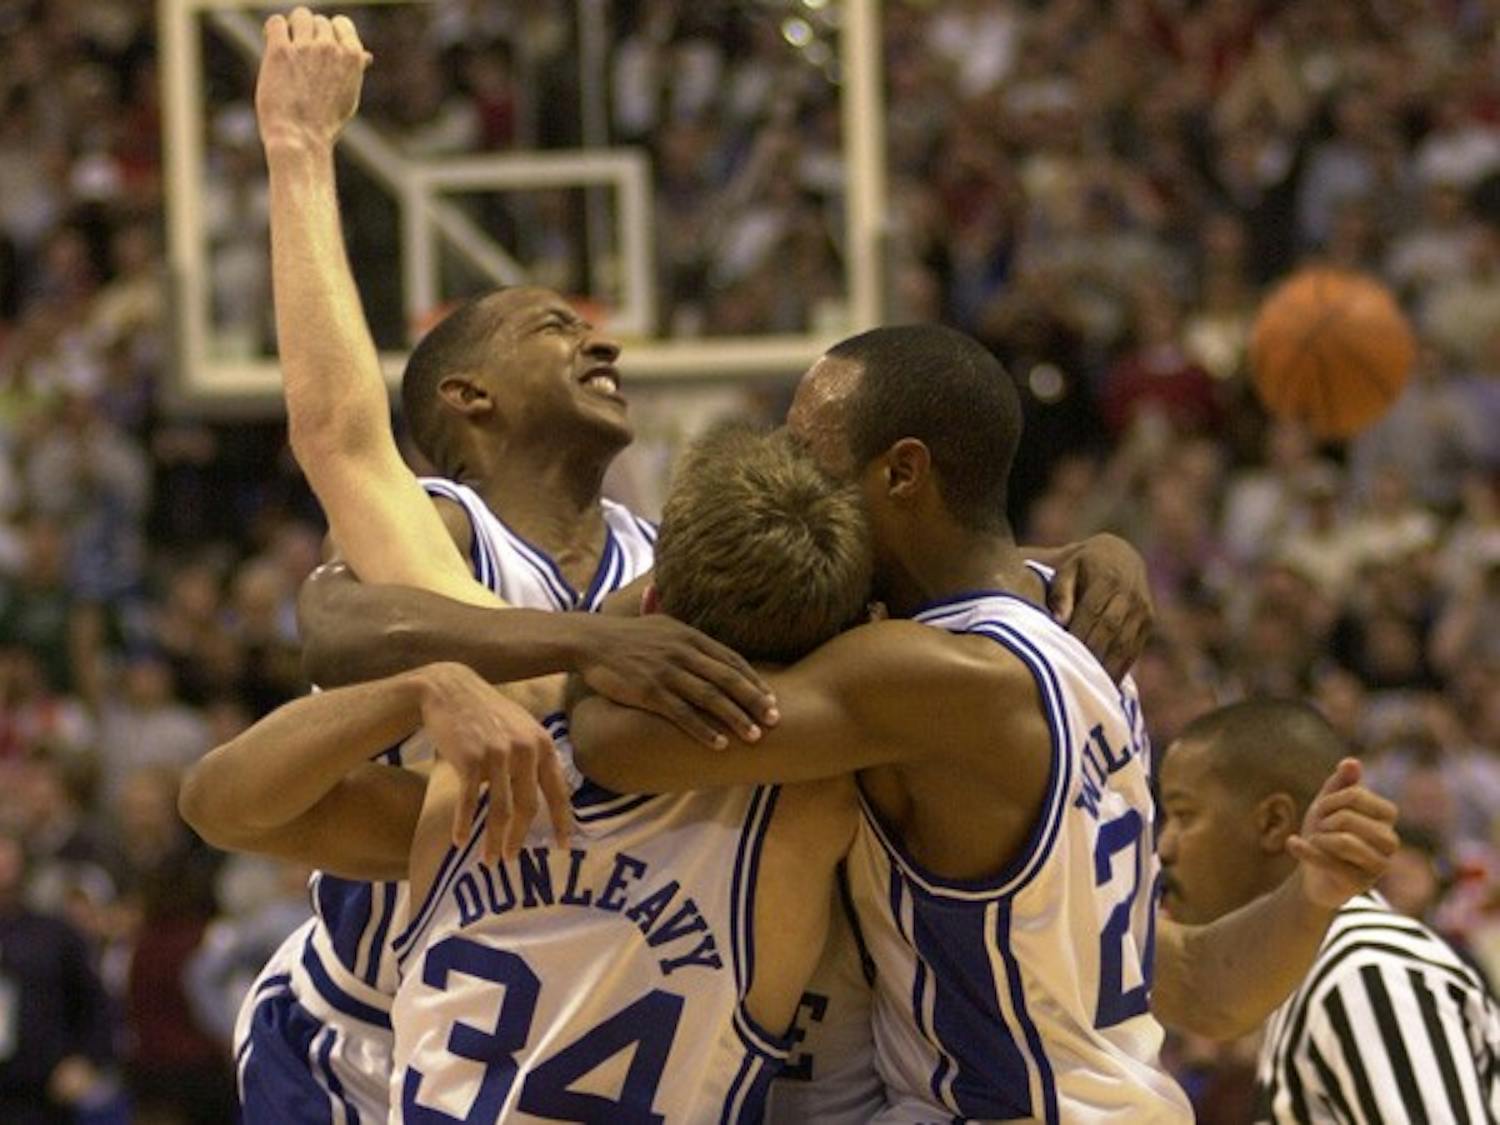 Chris Duhon, Mike Dunleavy, Jay Williams and one unidentified player celebrate after Duke’s victory in the 2001 national championship game.